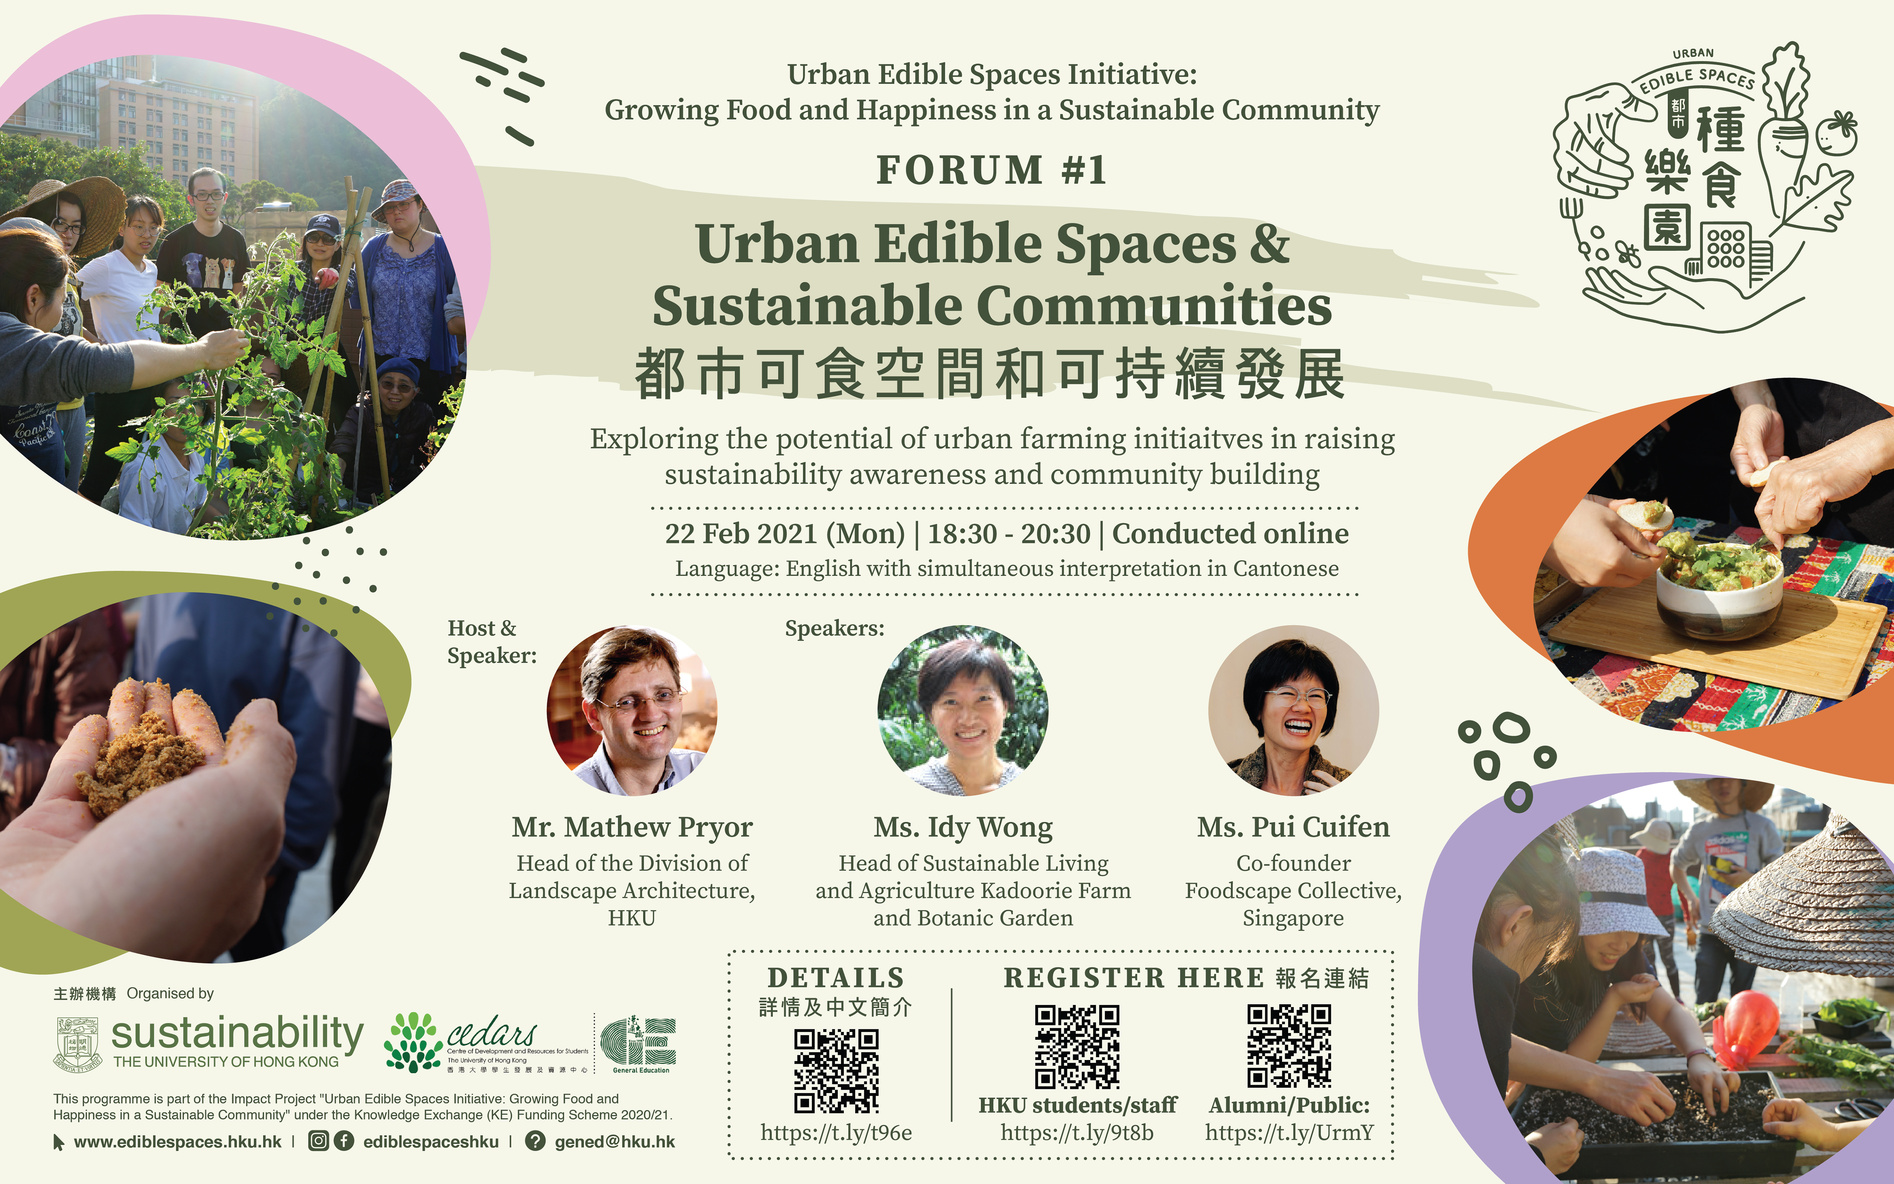 Urban Edible Spaces and Sustainable Communities 都市可食空間和可持續發展